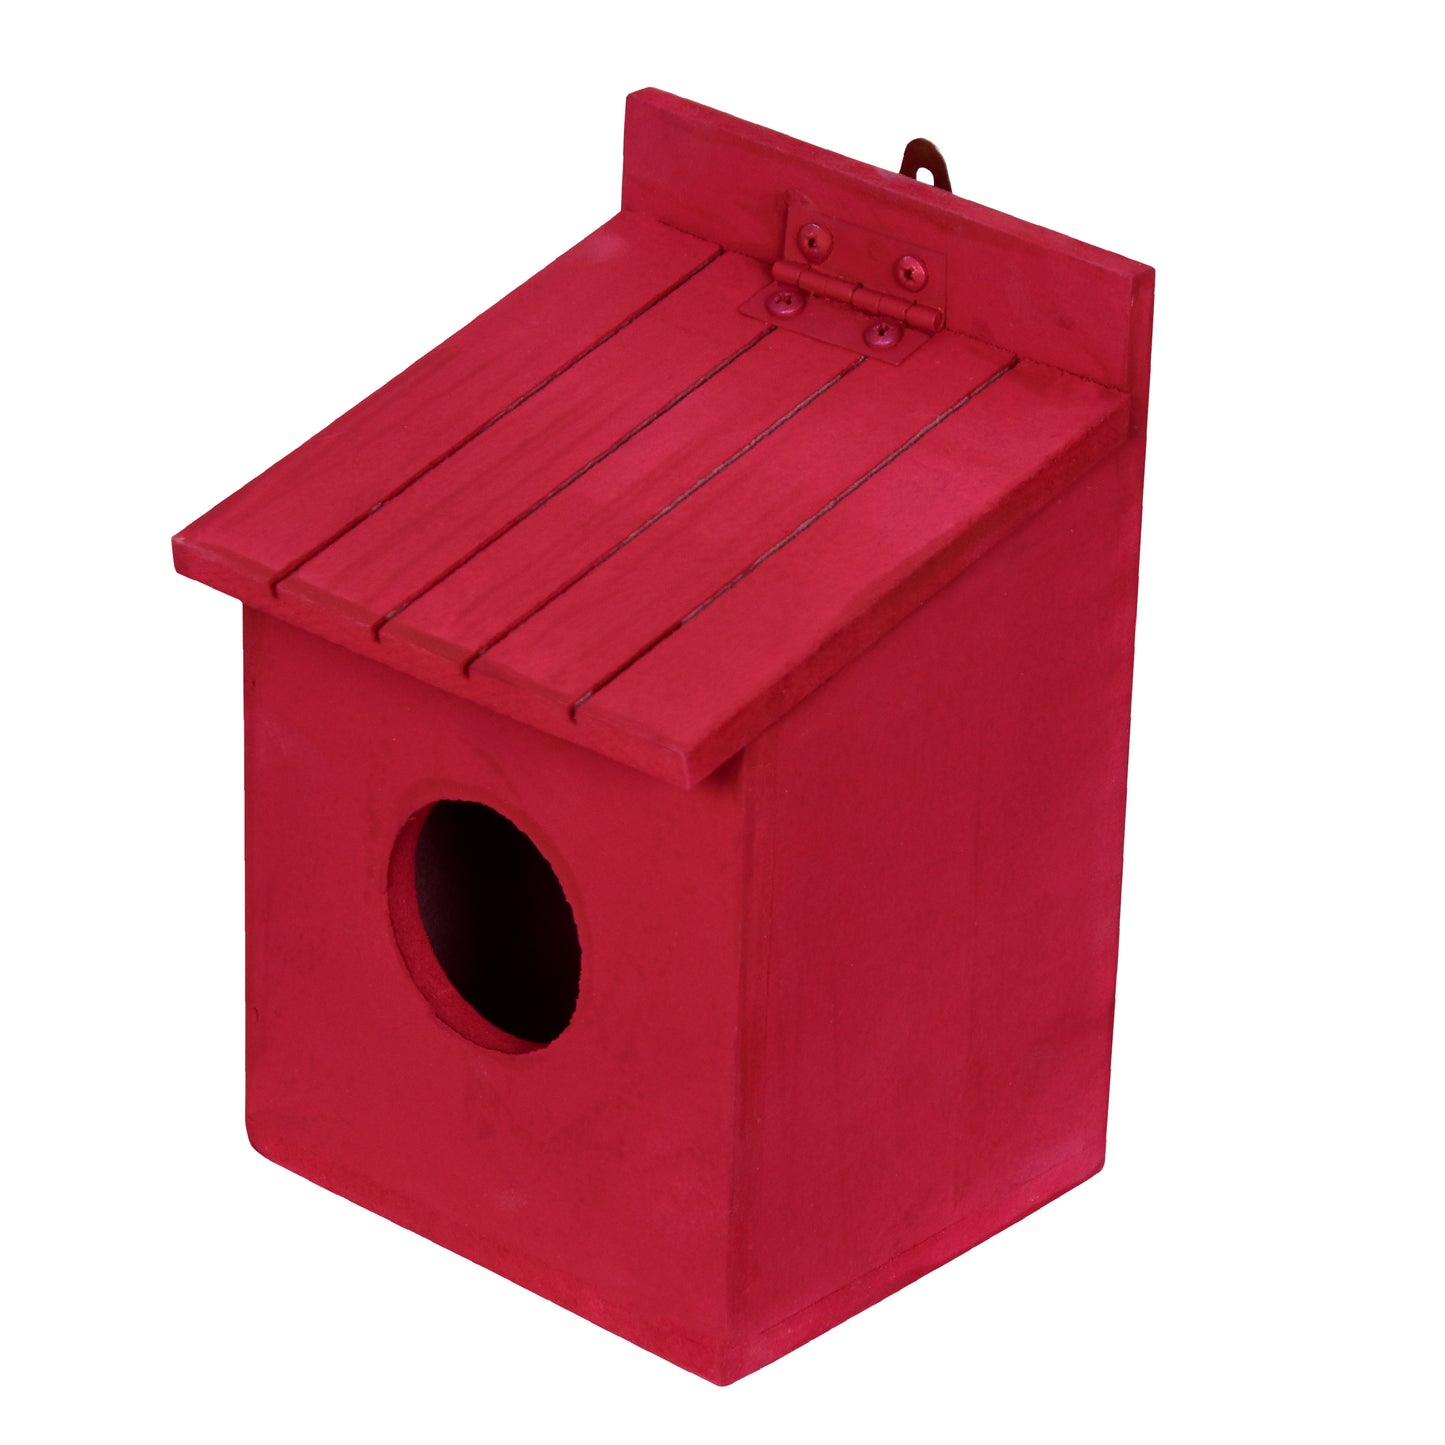 Openable Red - Bird House Wooden